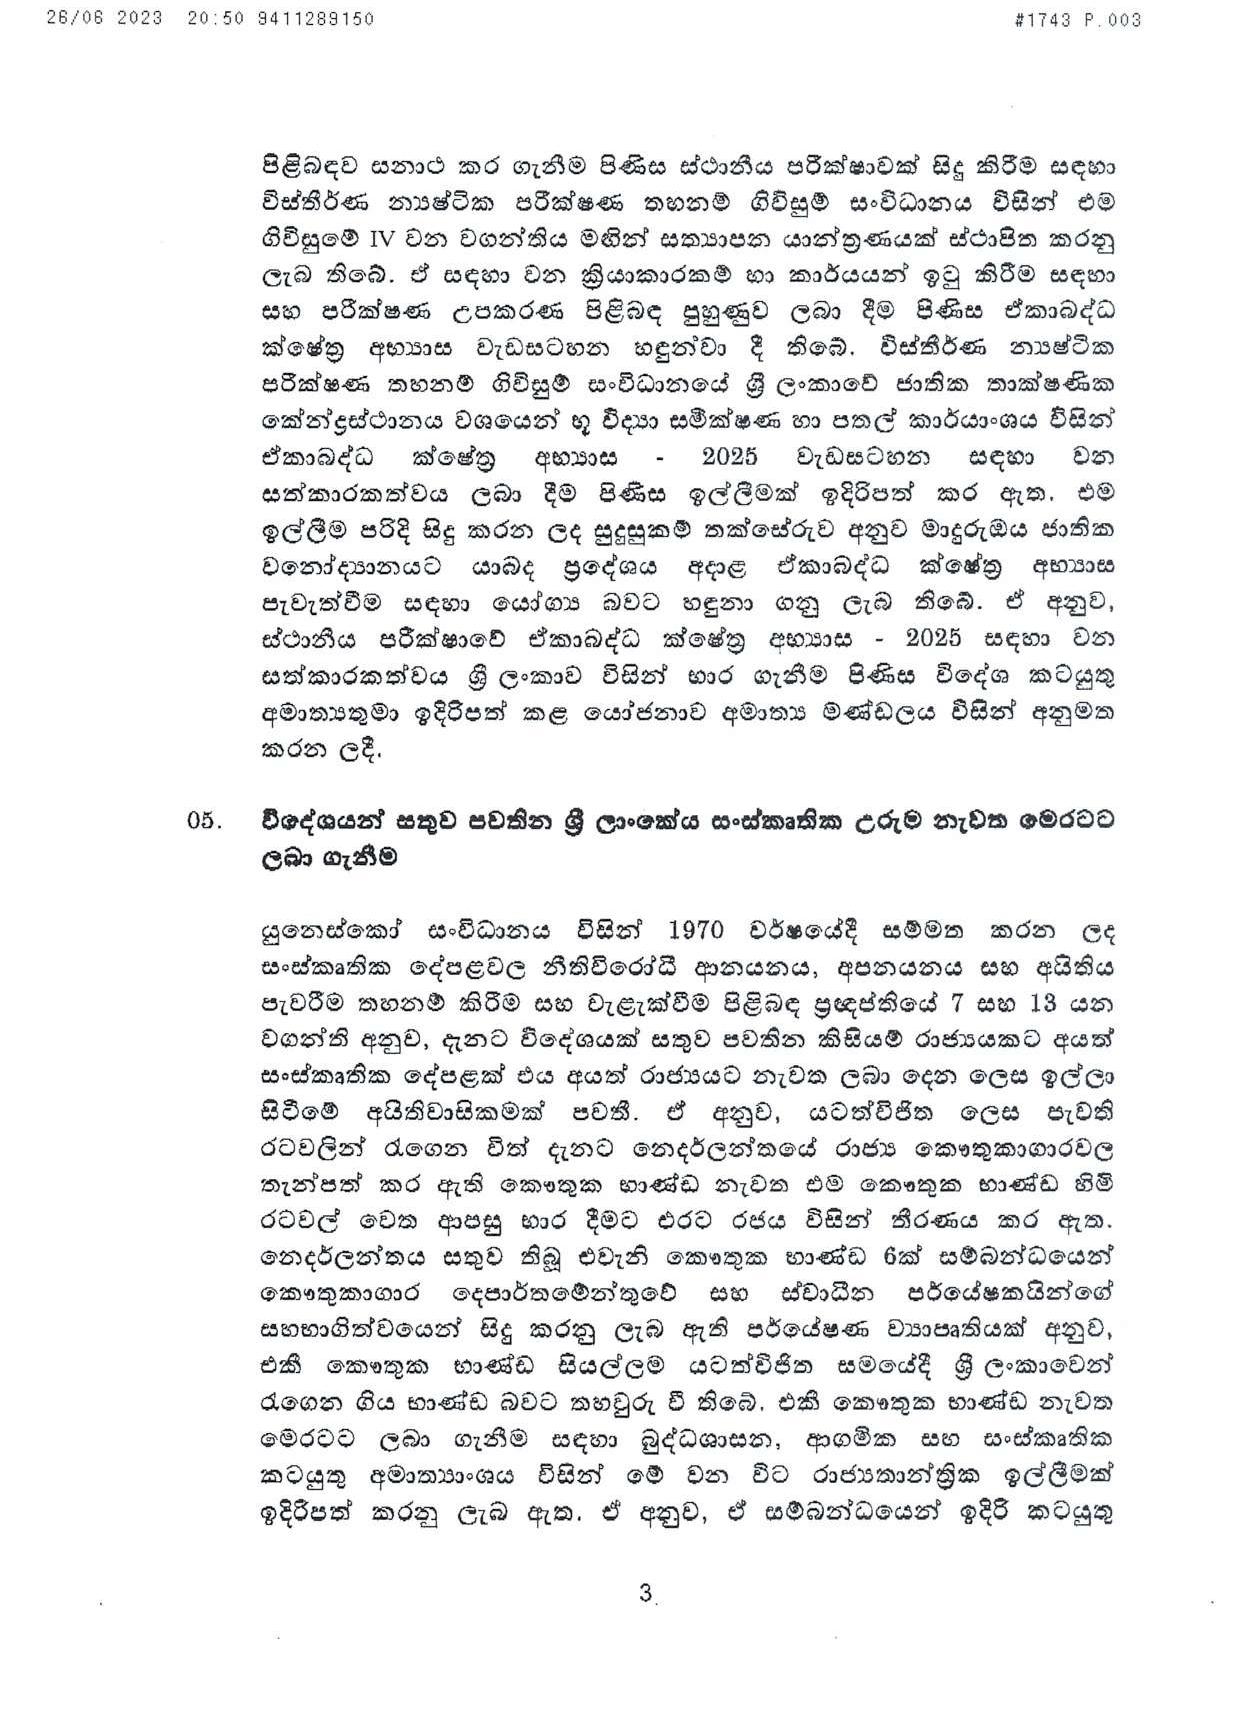 Cabinet Decision on 26.06.2023 page 003